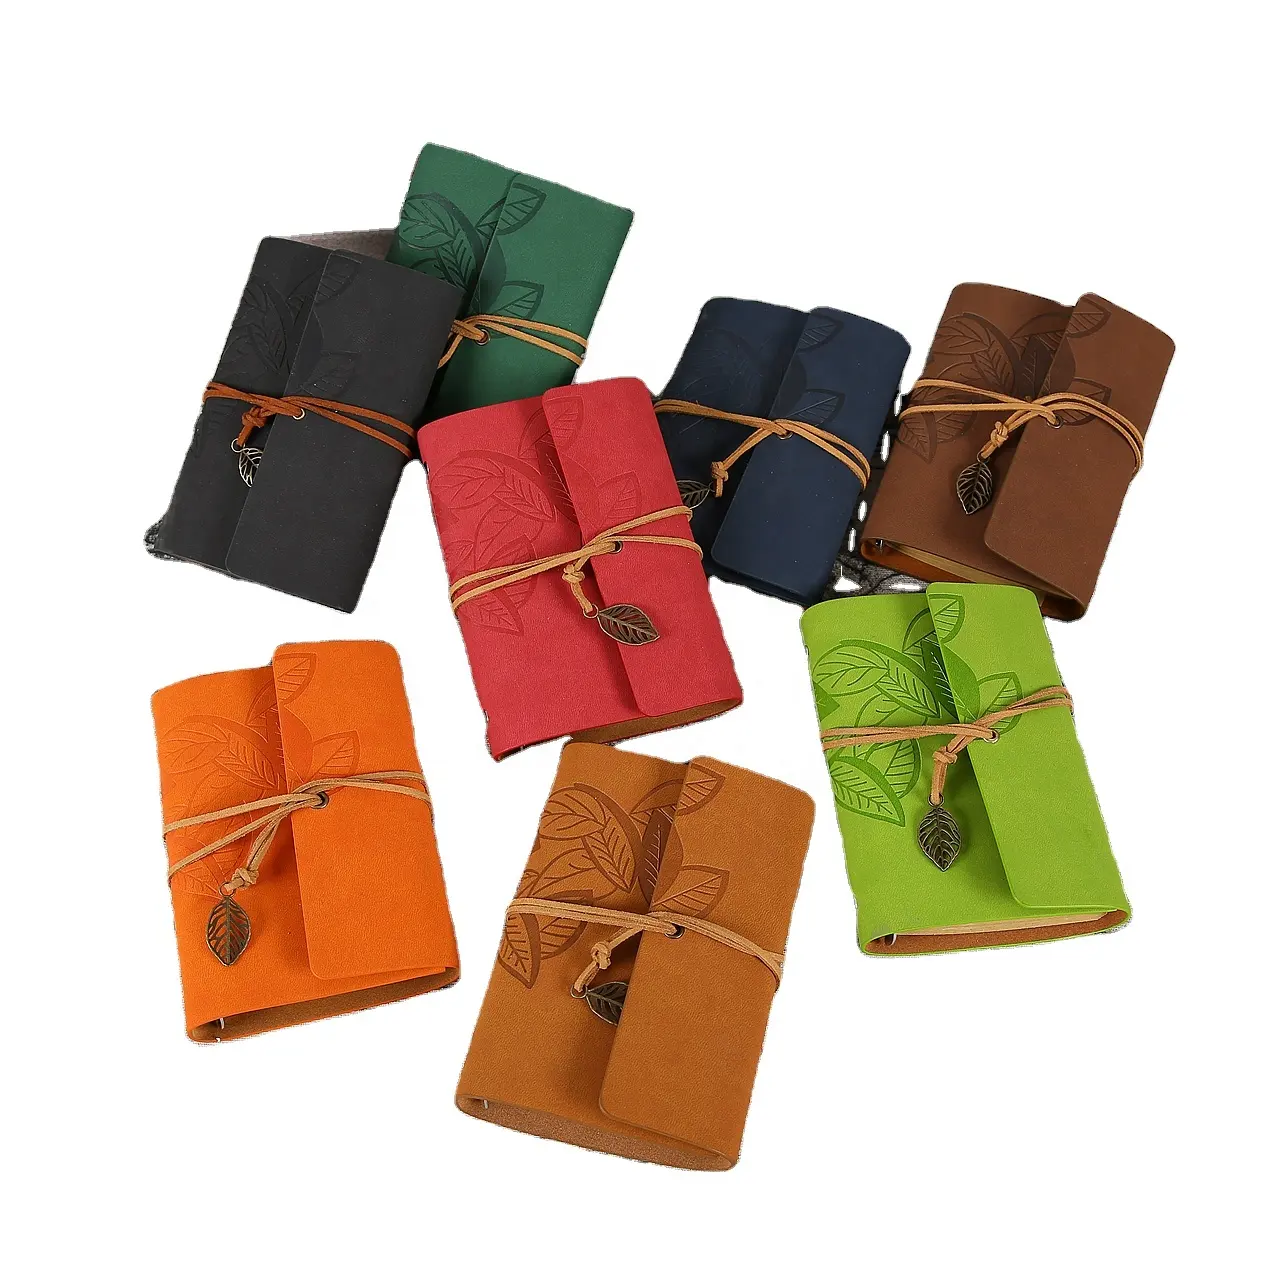 Diary Bloc-notes Carnet de notes A6 Pu Vintage Journals Printing Pages Pocket Note Book with Rope Band